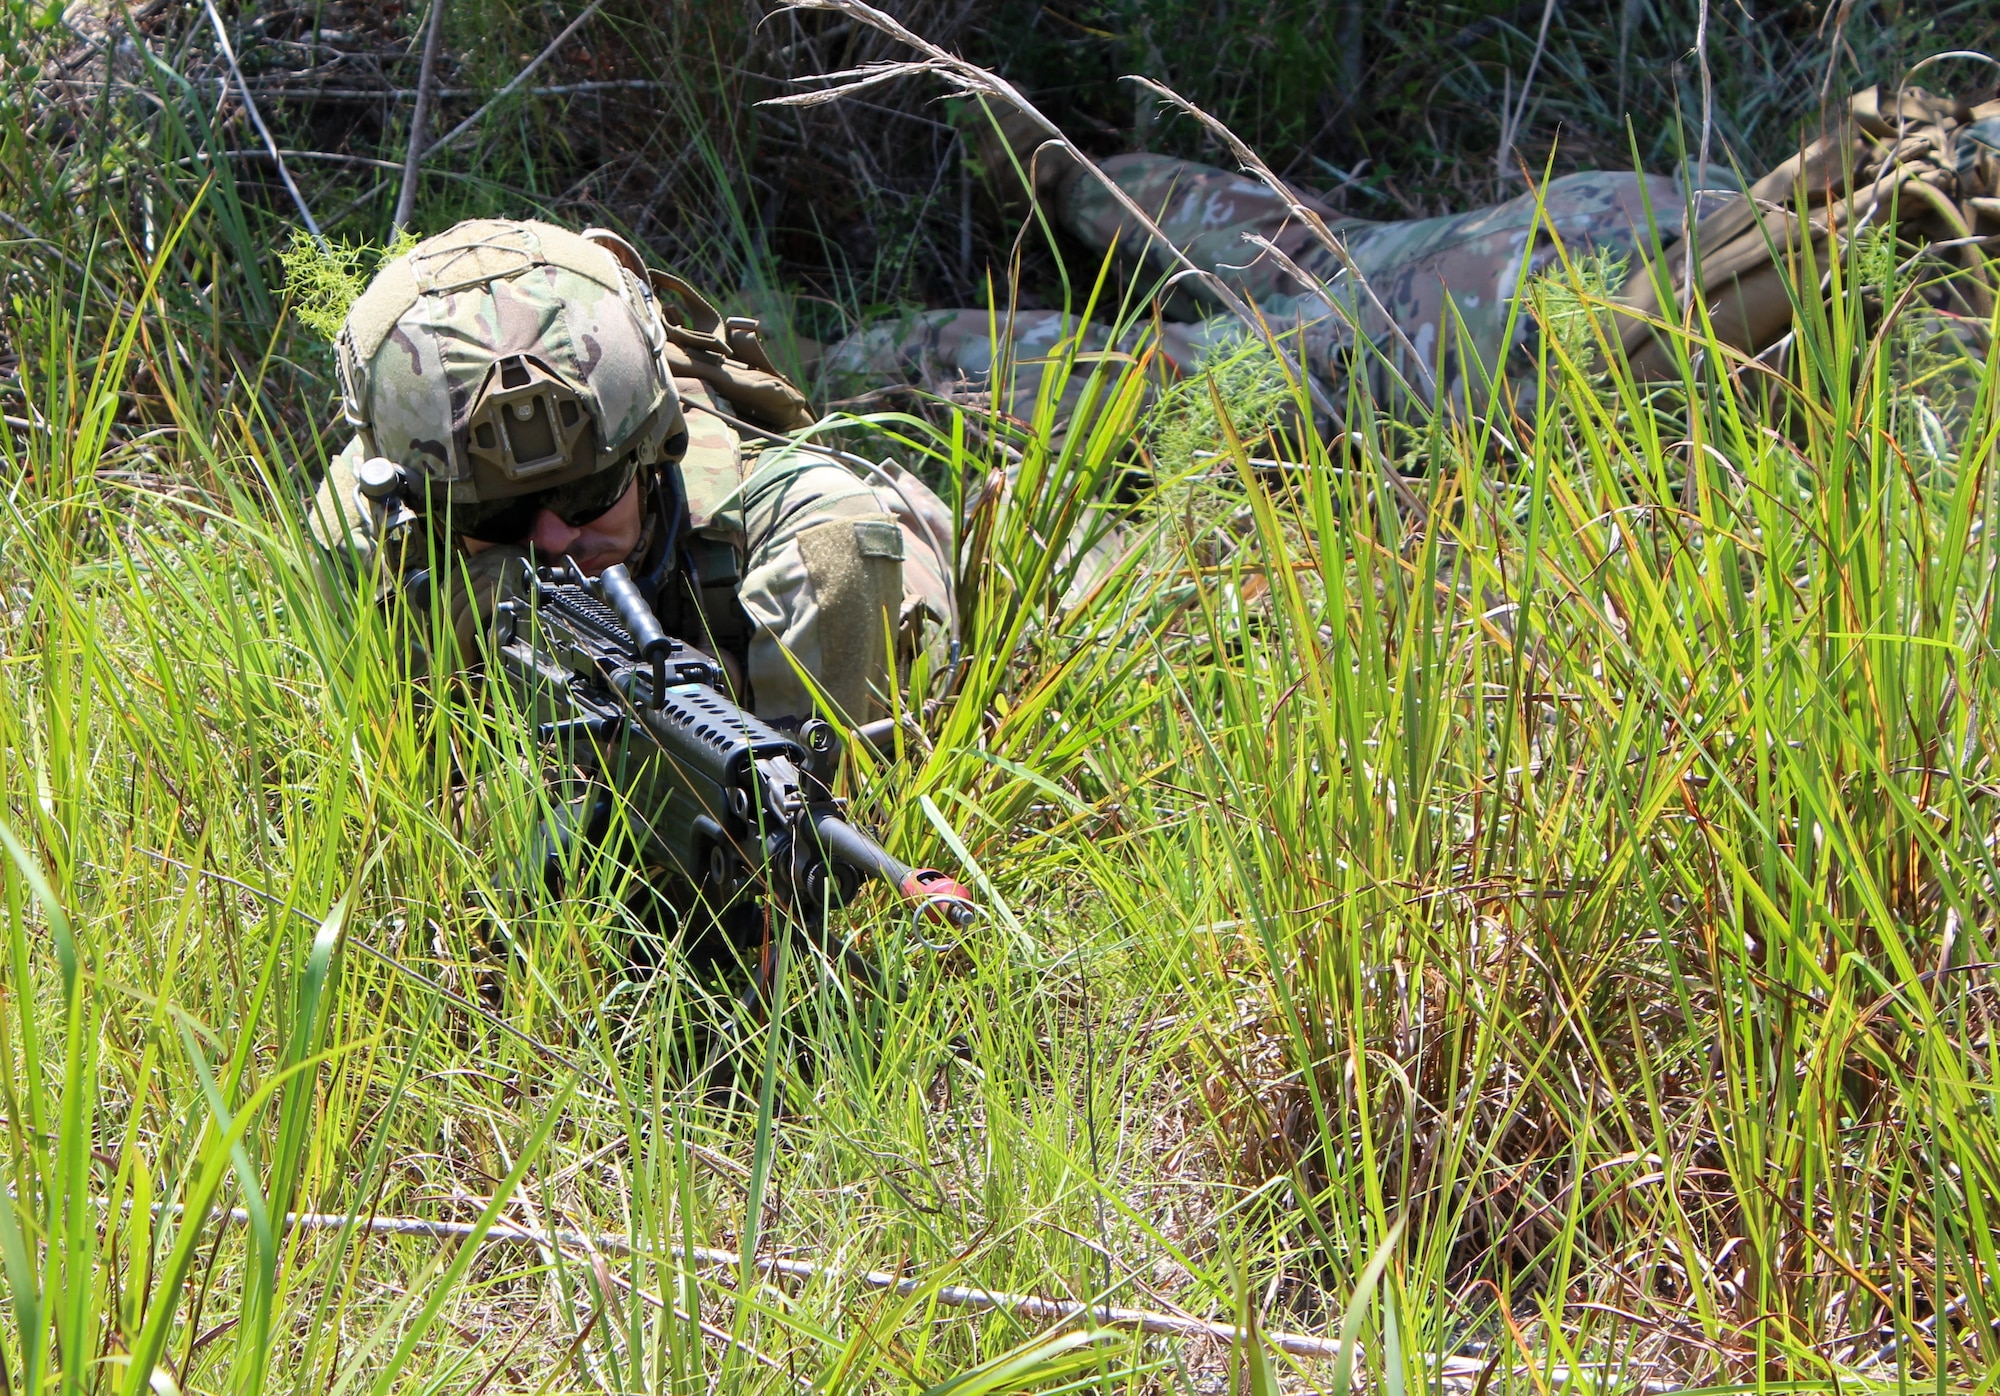 Airman laying in the brush with weapon ready